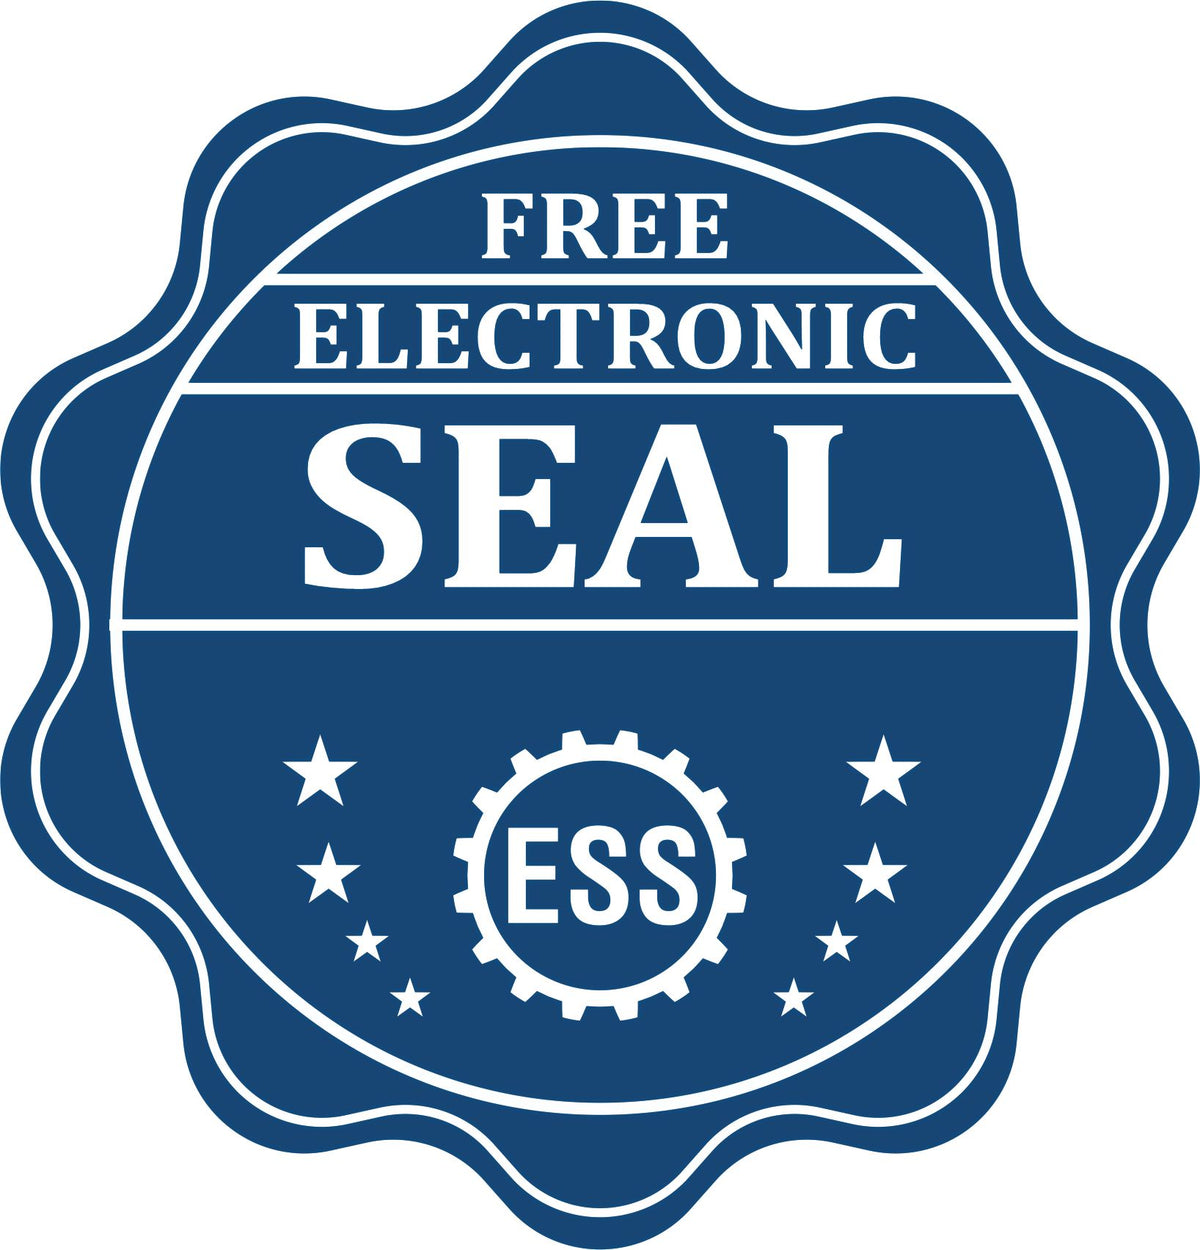 A badge showing a free electronic seal for the Hybrid Hawaii Architect Seal with stars and the ESS gear on the emblem.